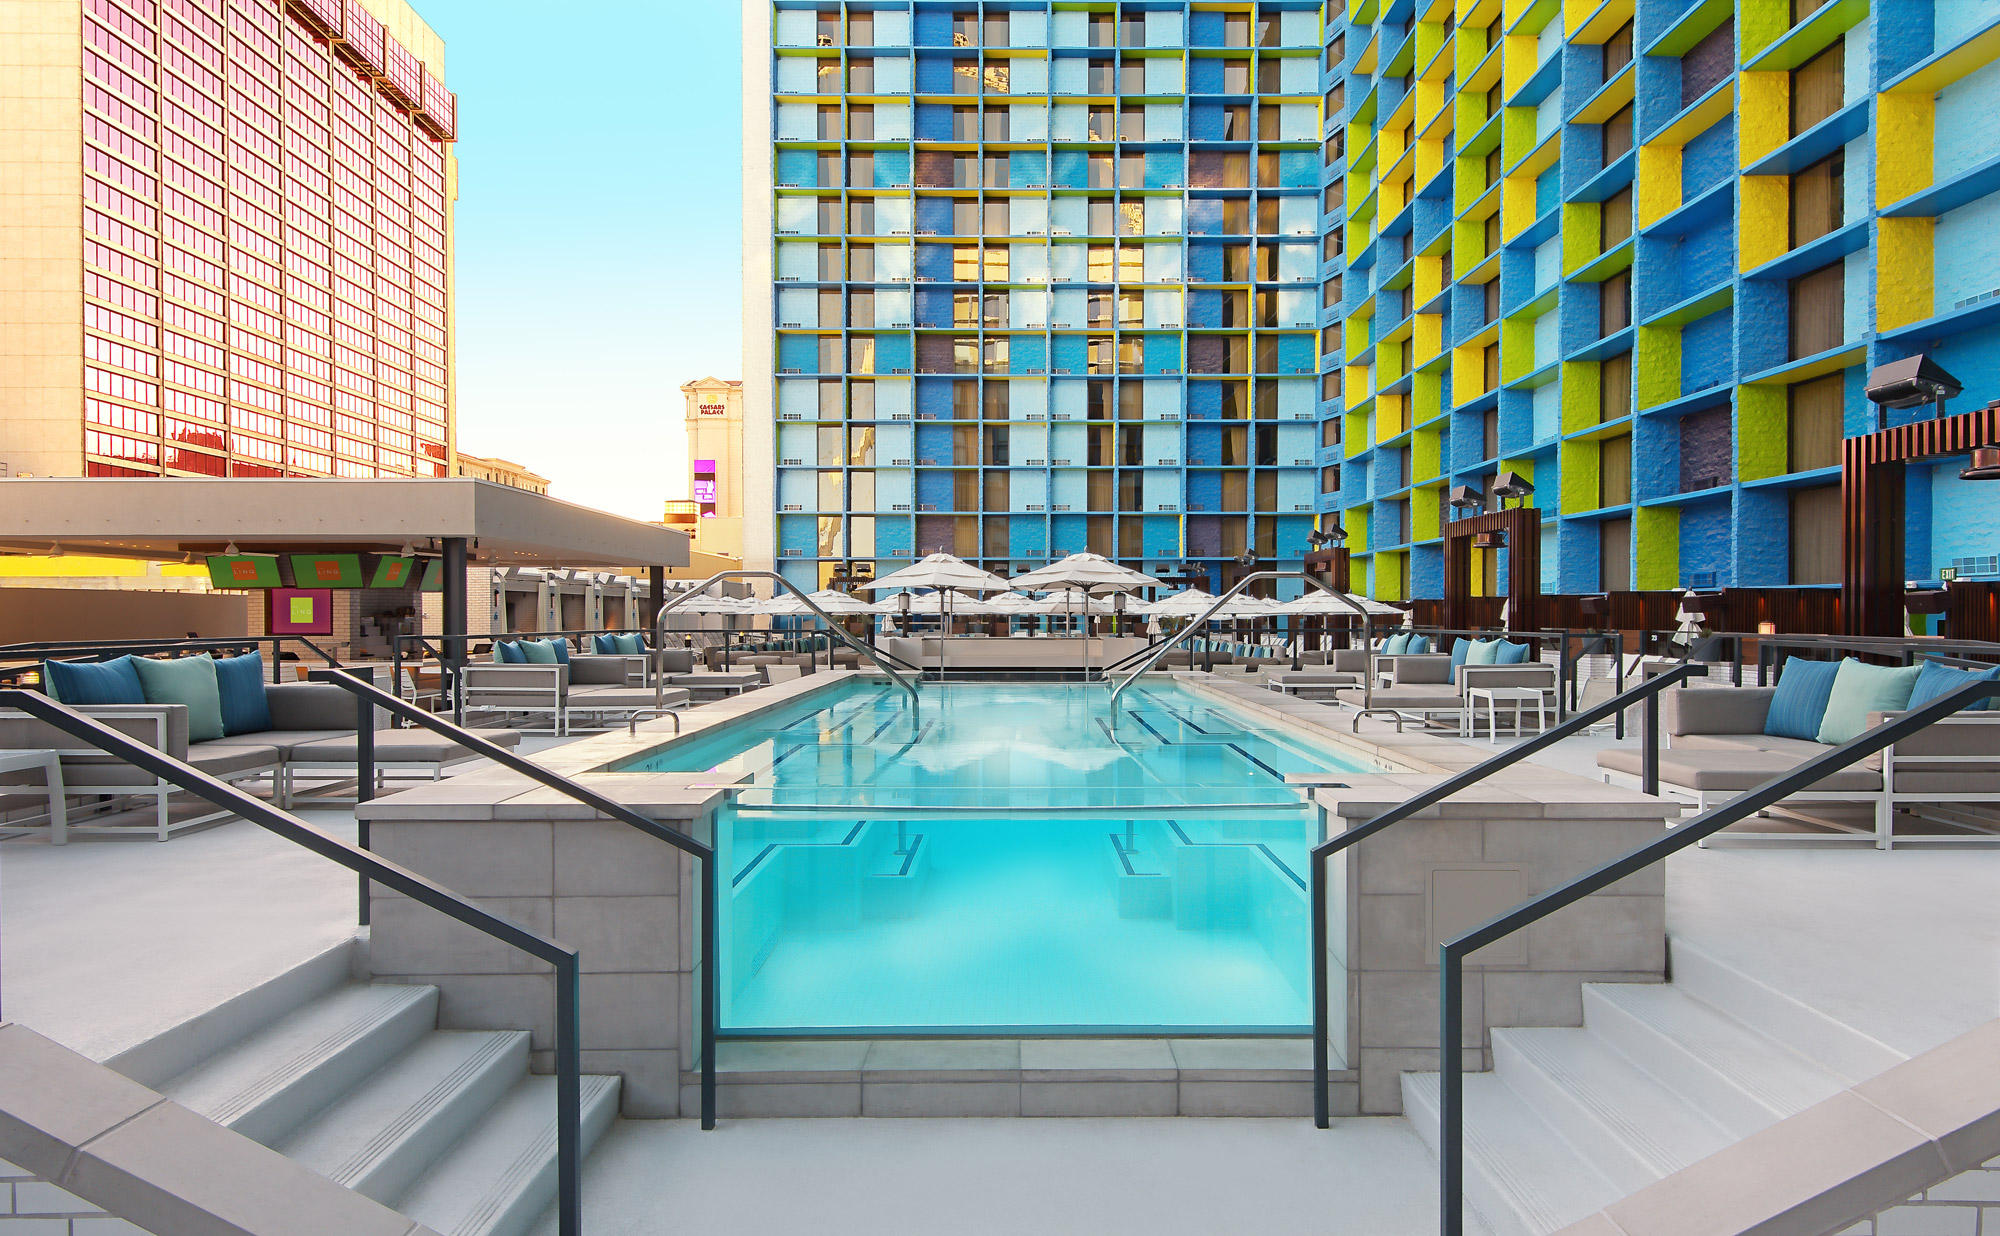 The Linq Hotel outdoor pool for all summer pool season enjoyment. Pool season is May to October.